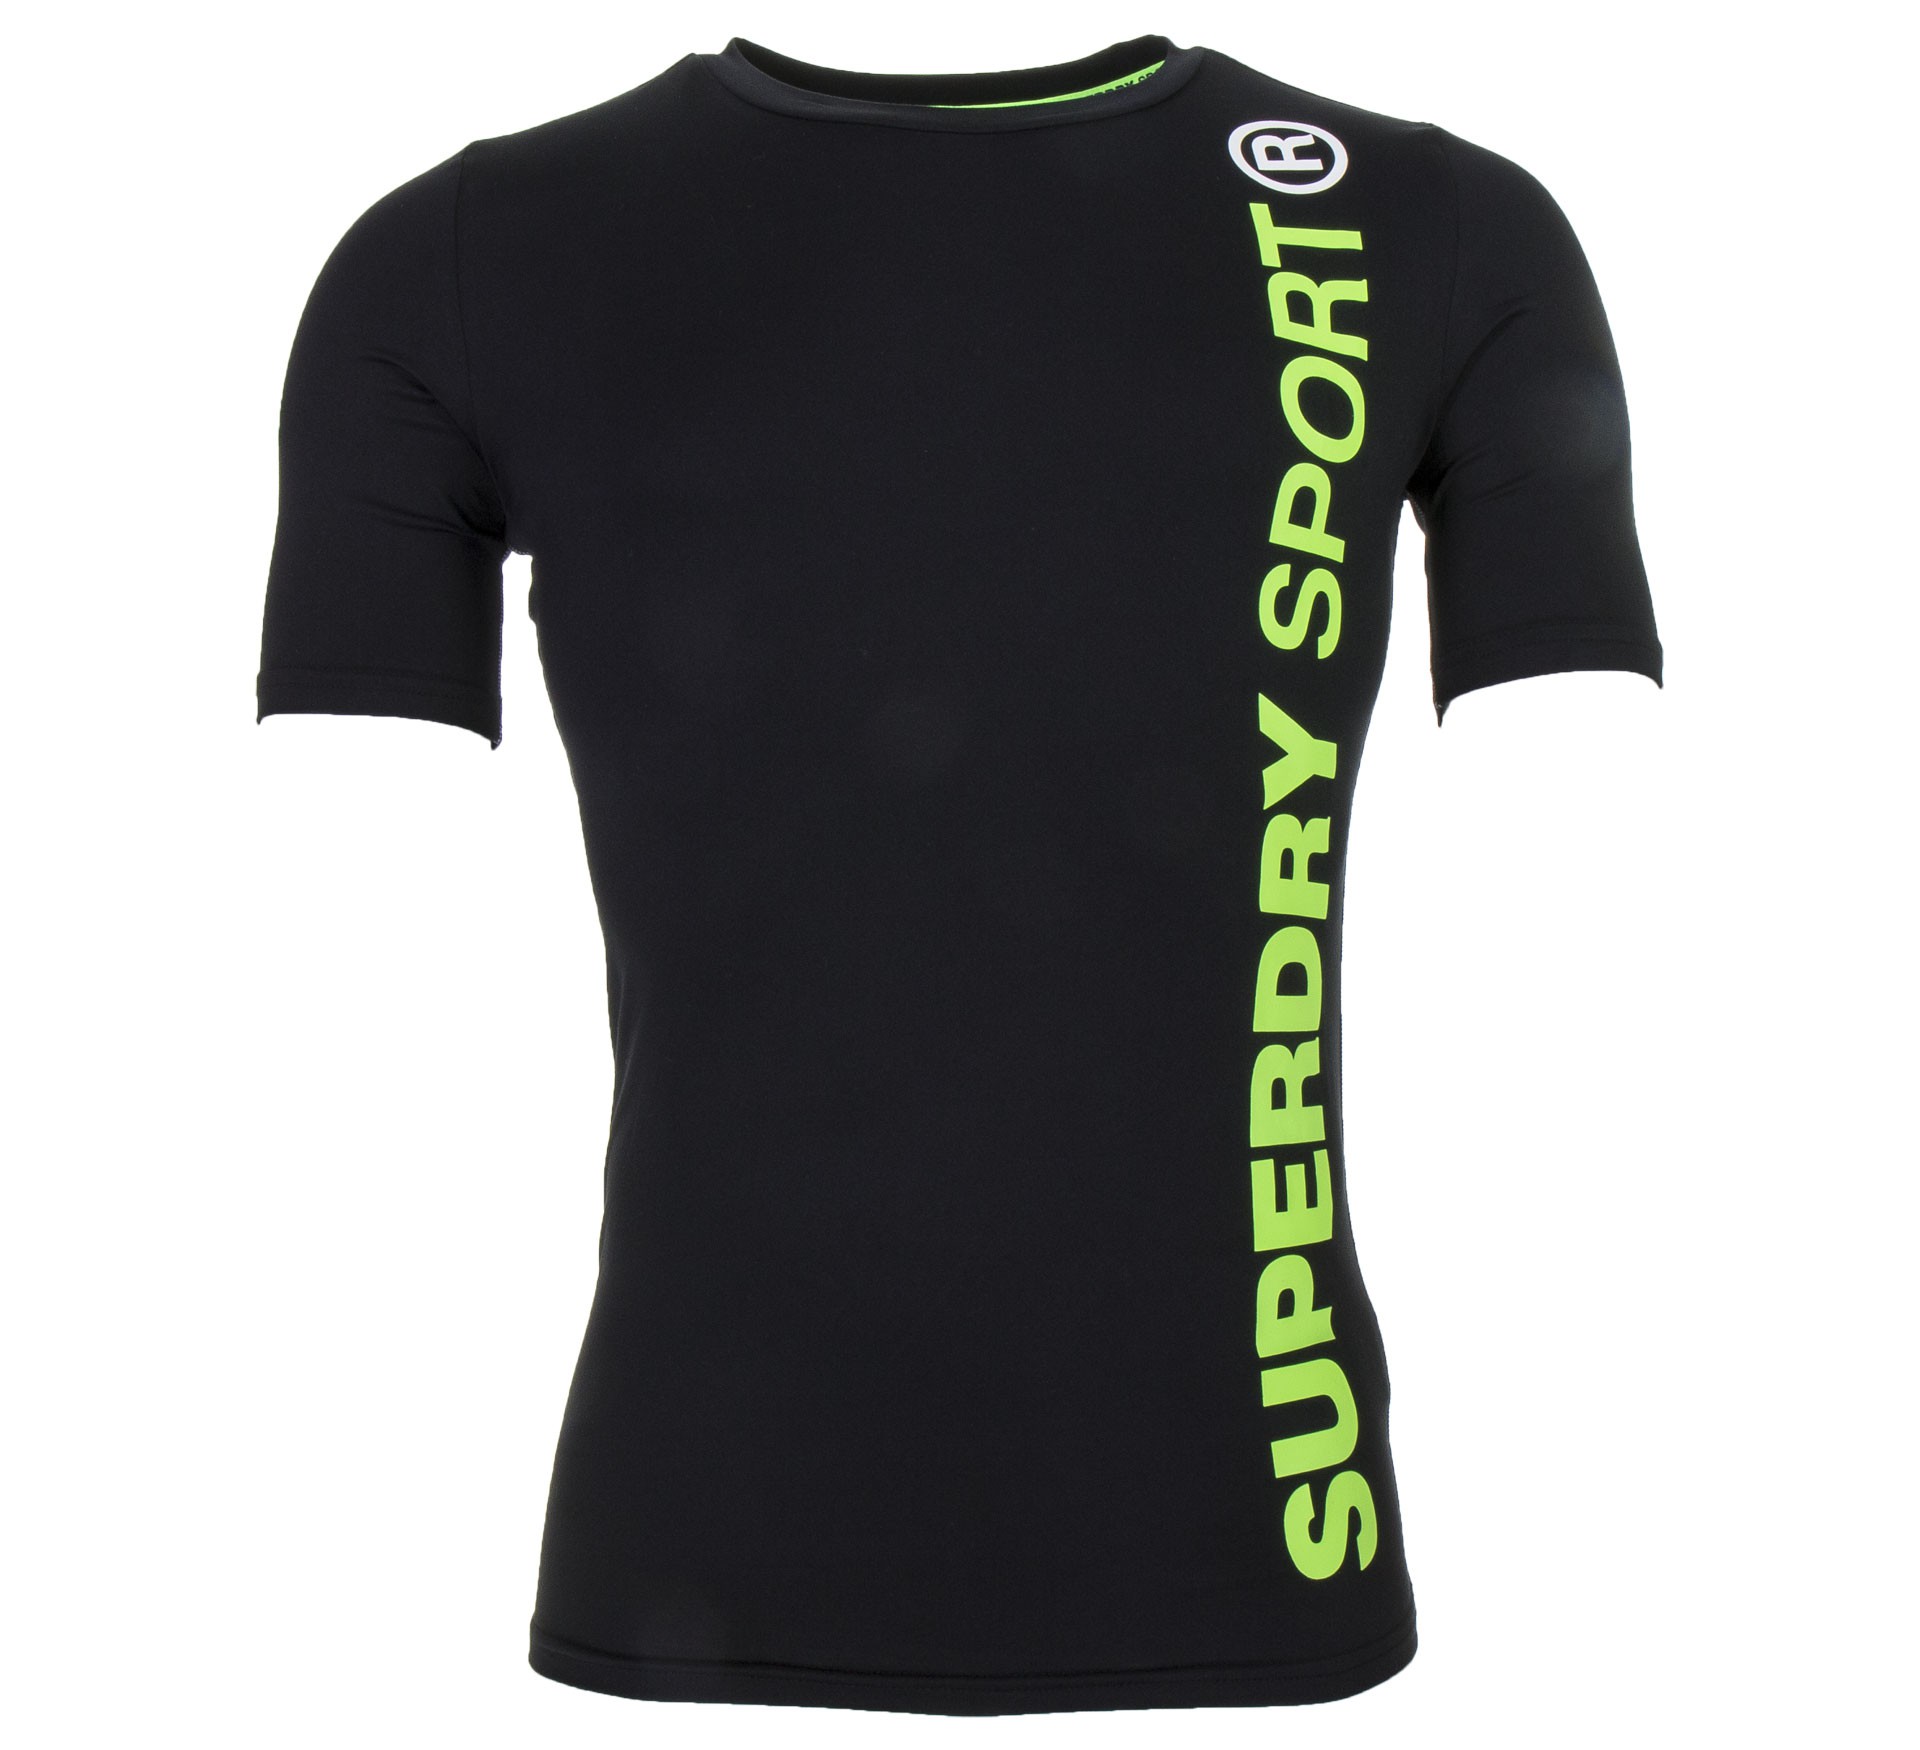 Plutosport - Superdry Sports Athletic S/S Tee